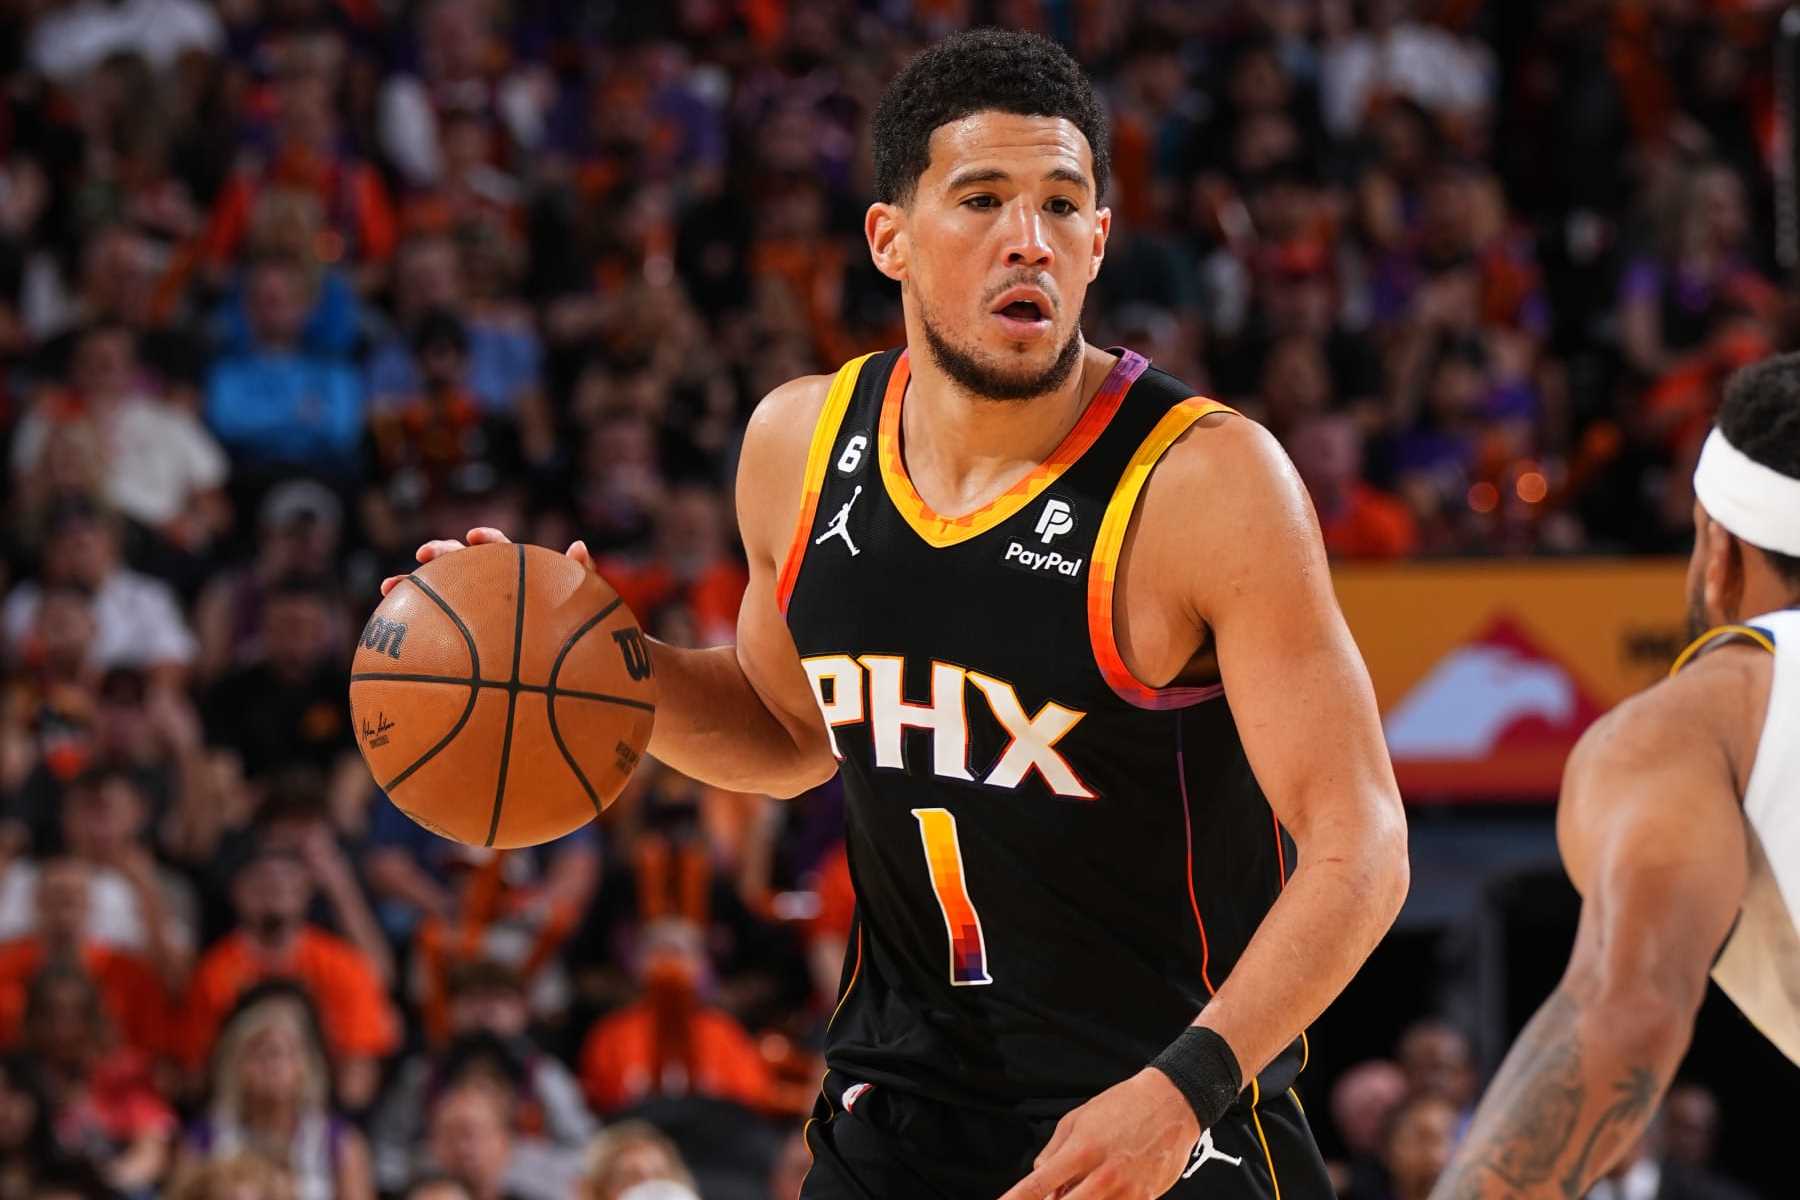 Nike, Phoenix Suns' Devin Booker Debut New Basketball Shoe - Sports  Illustrated Inside The Suns News, Analysis and More